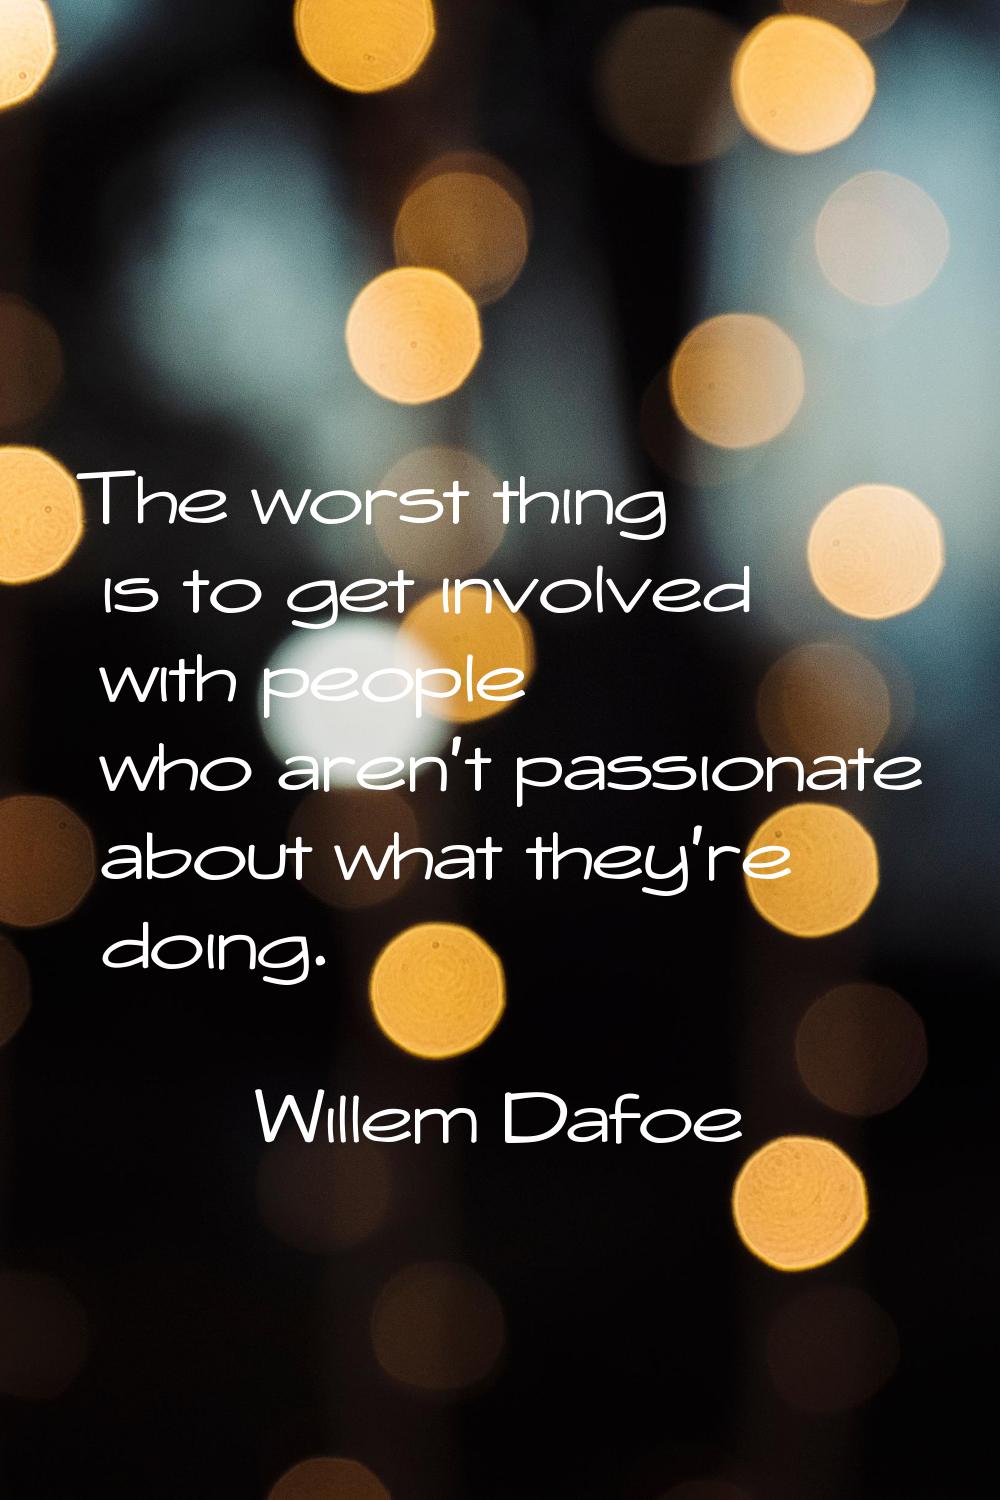 The worst thing is to get involved with people who aren't passionate about what they're doing.